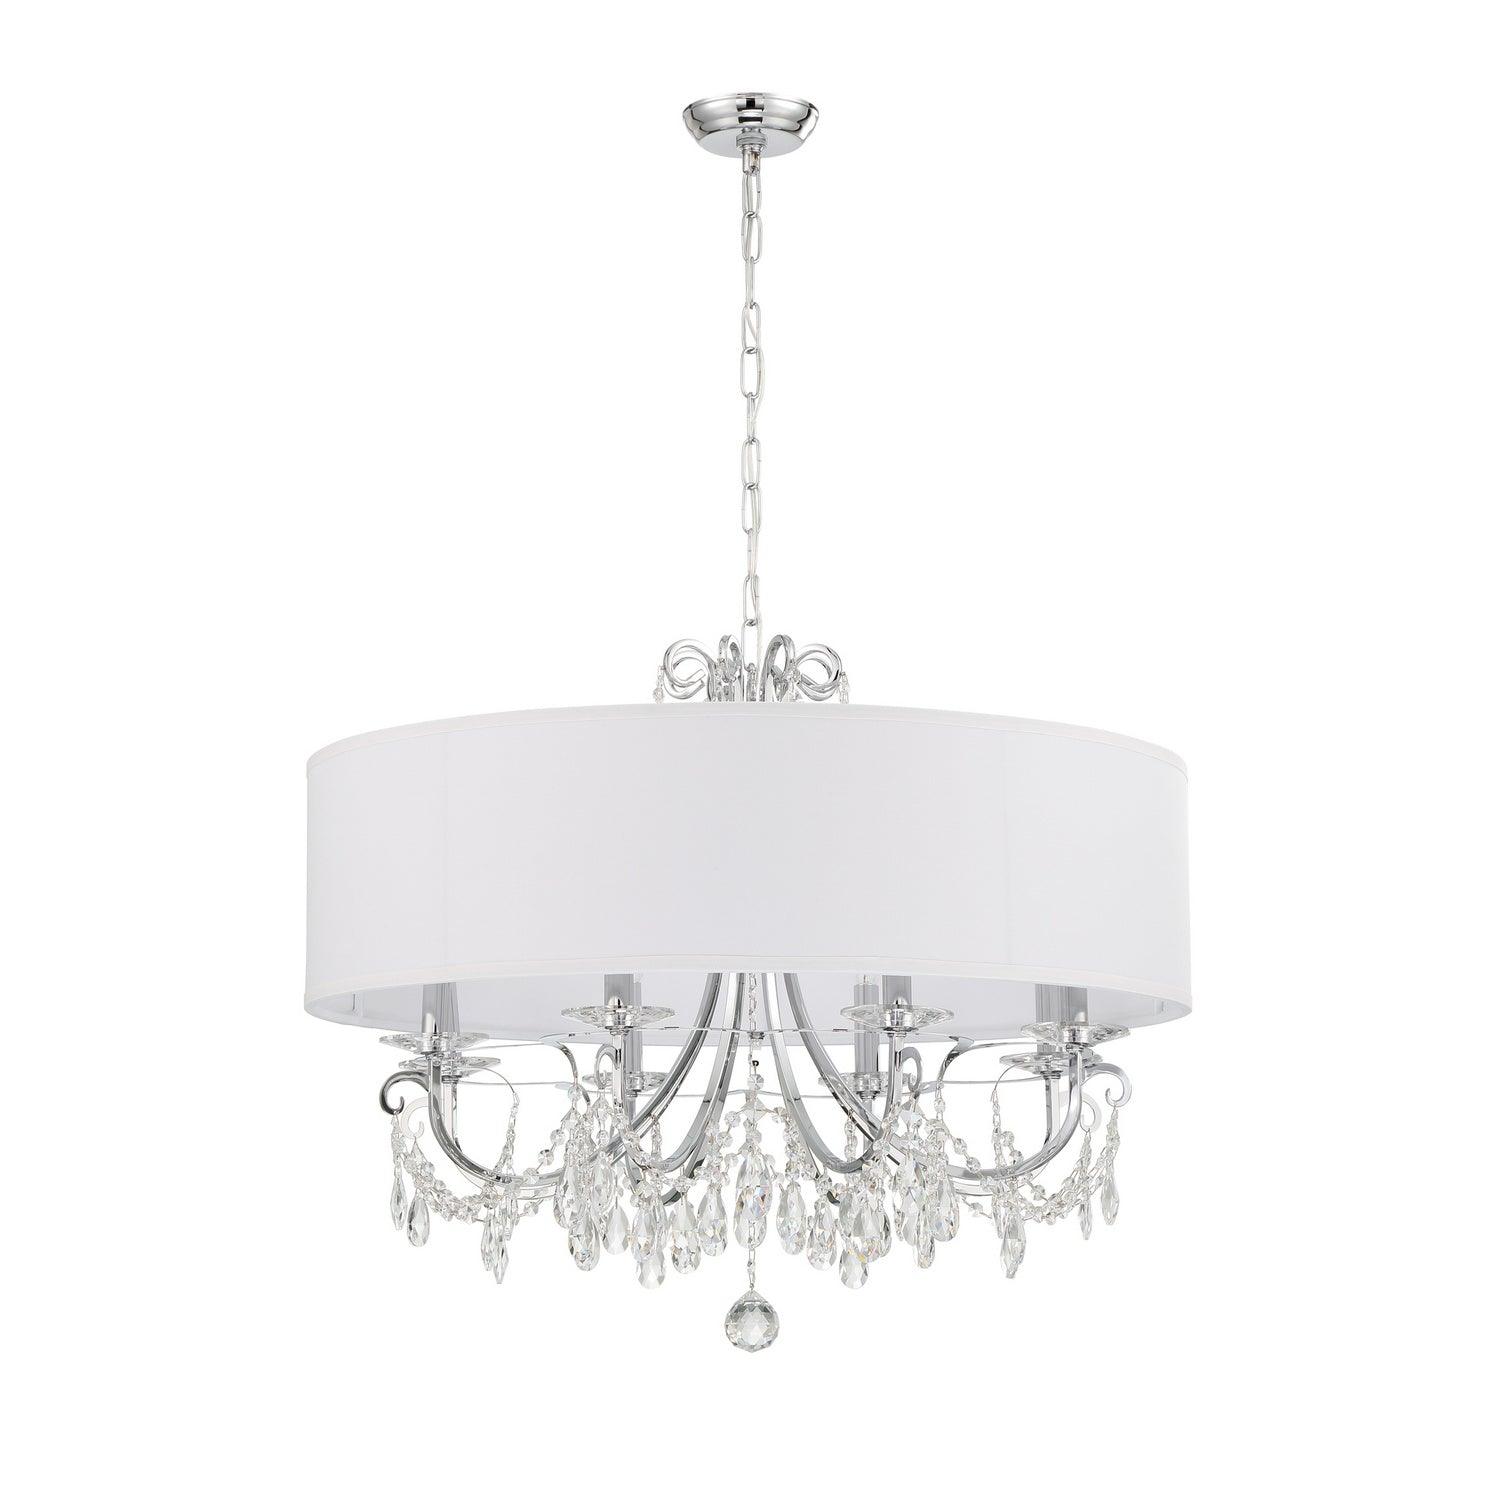 Crystorama - Othello Drum Shade Chandelier - 6628-CH-CL-MWP | Montreal Lighting & Hardware